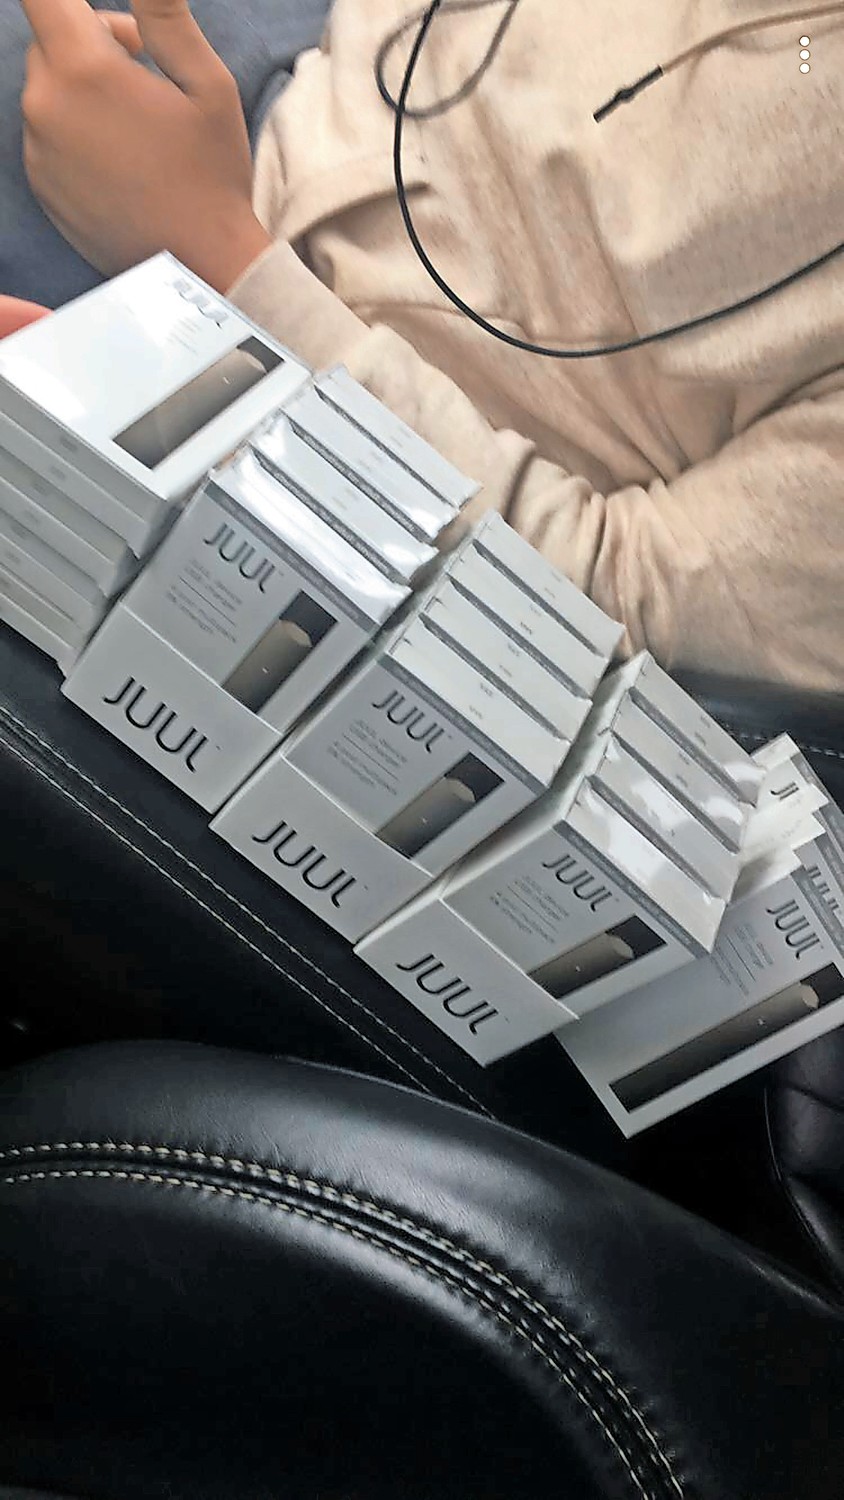 Vaping products are common among students locally and nationwide. The San Francisco-based company Juul produces the most used devices.